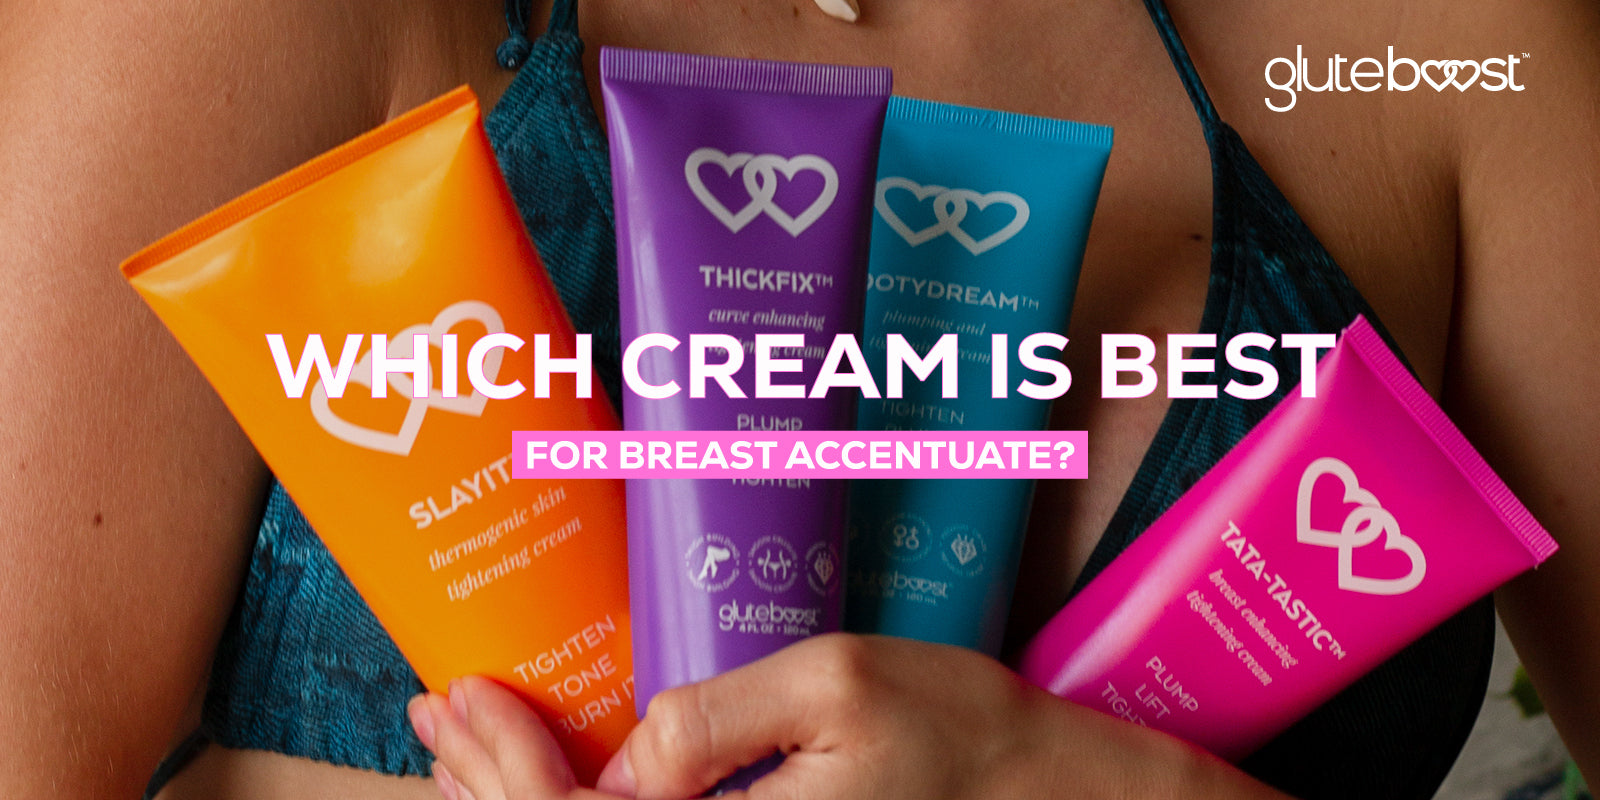 Which Cream is Best for Breast Accentuate?